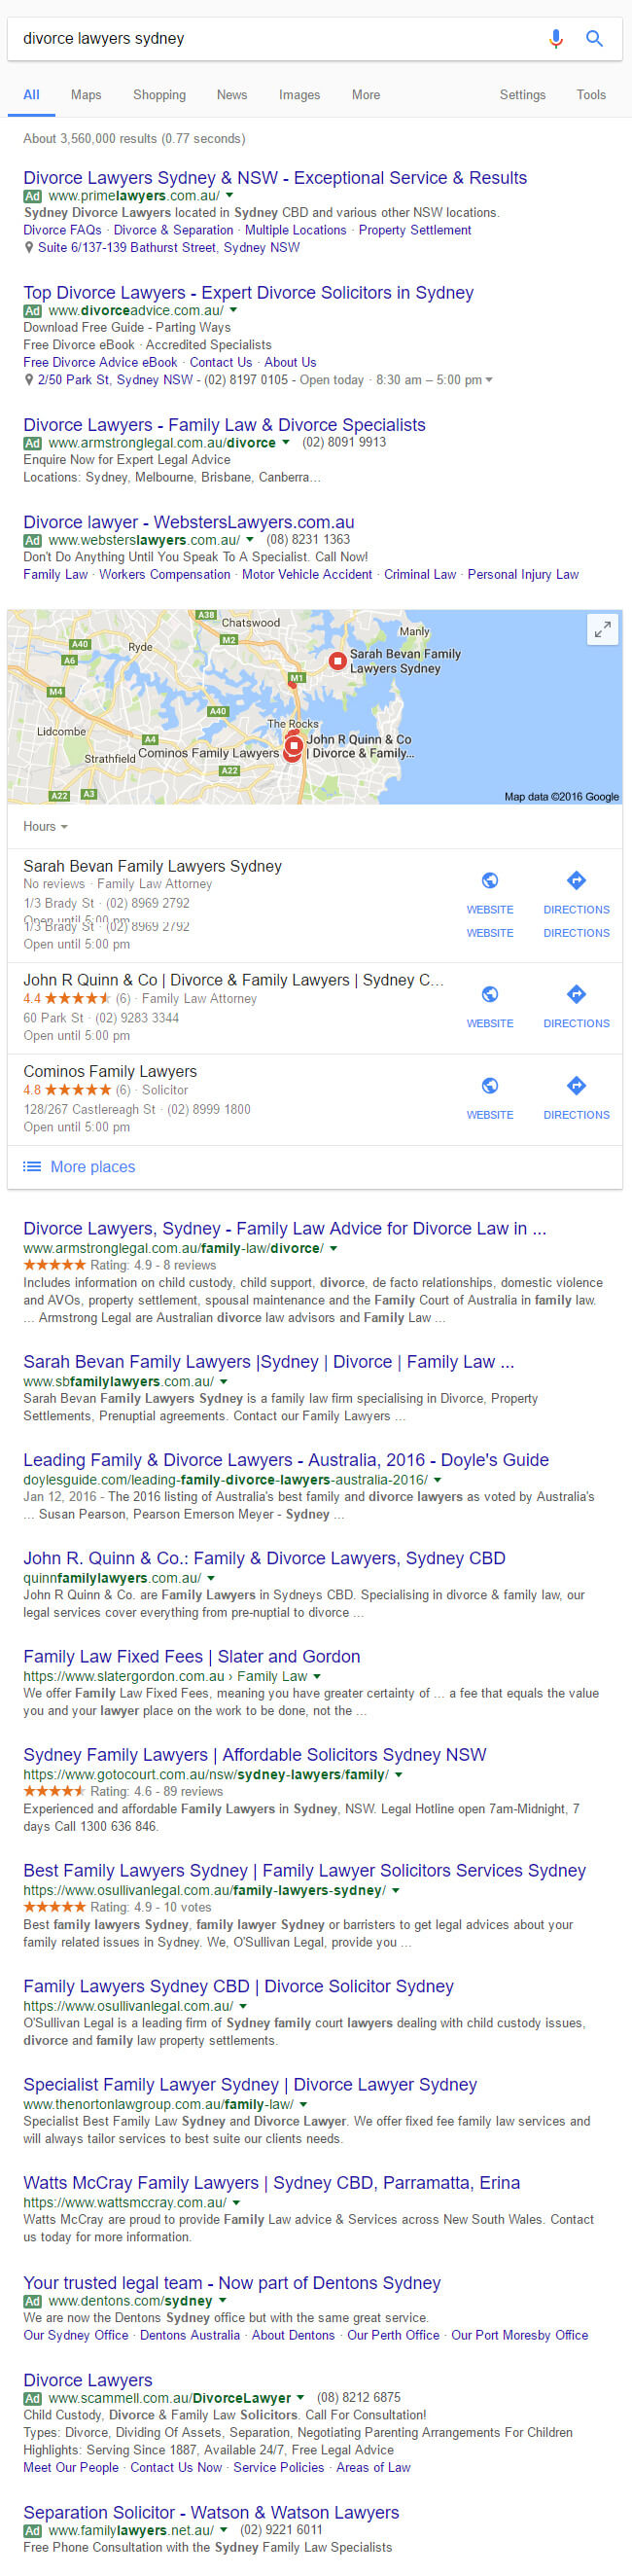 SERP Formation for divorce lawyers Sydney